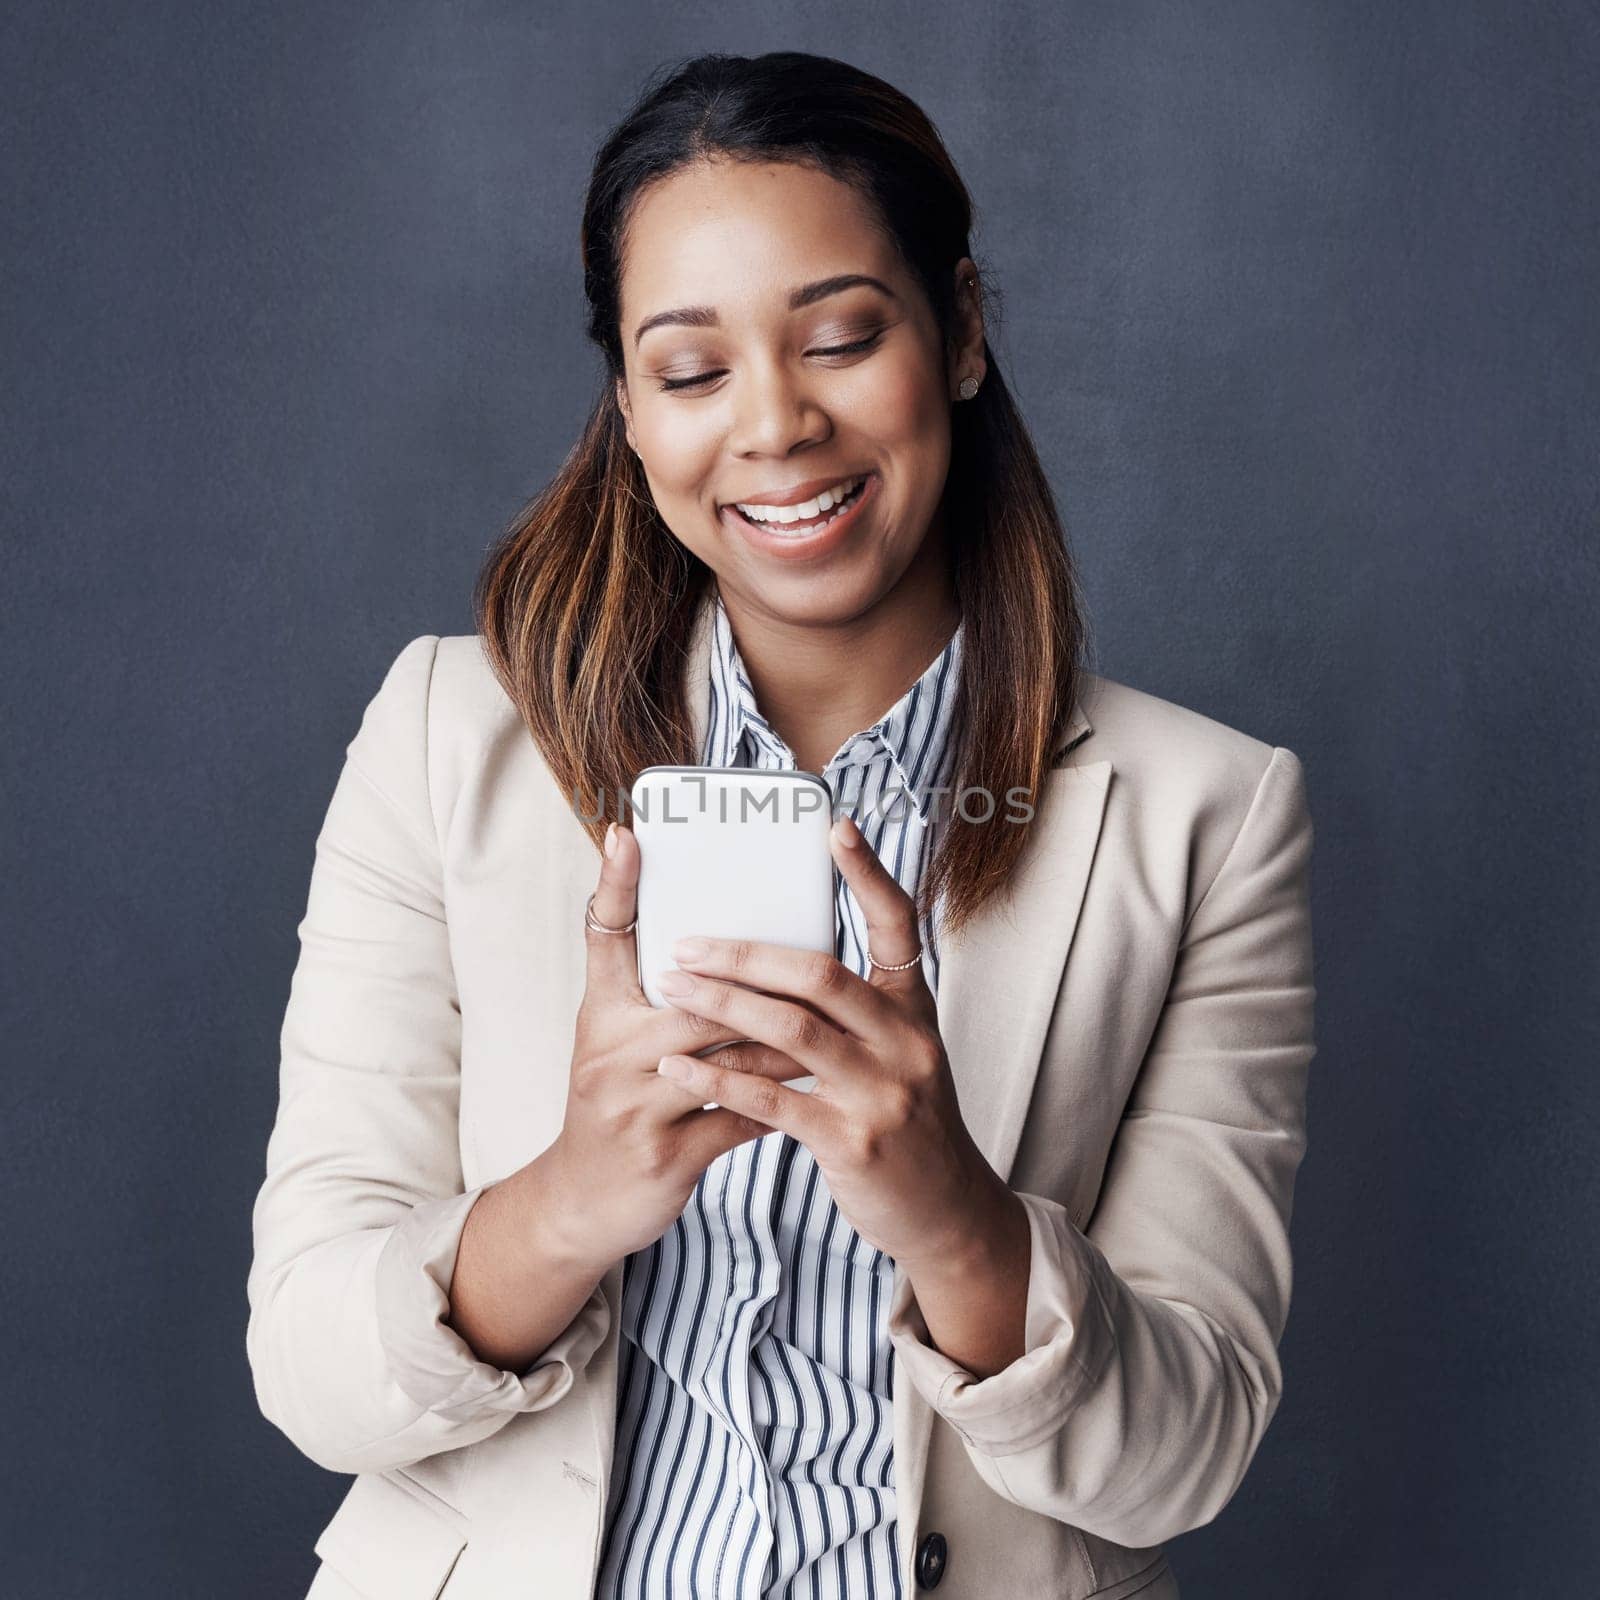 The perfect score is always something to strive for. Studio shot of a young businesswoman using her cellphone against a grey background